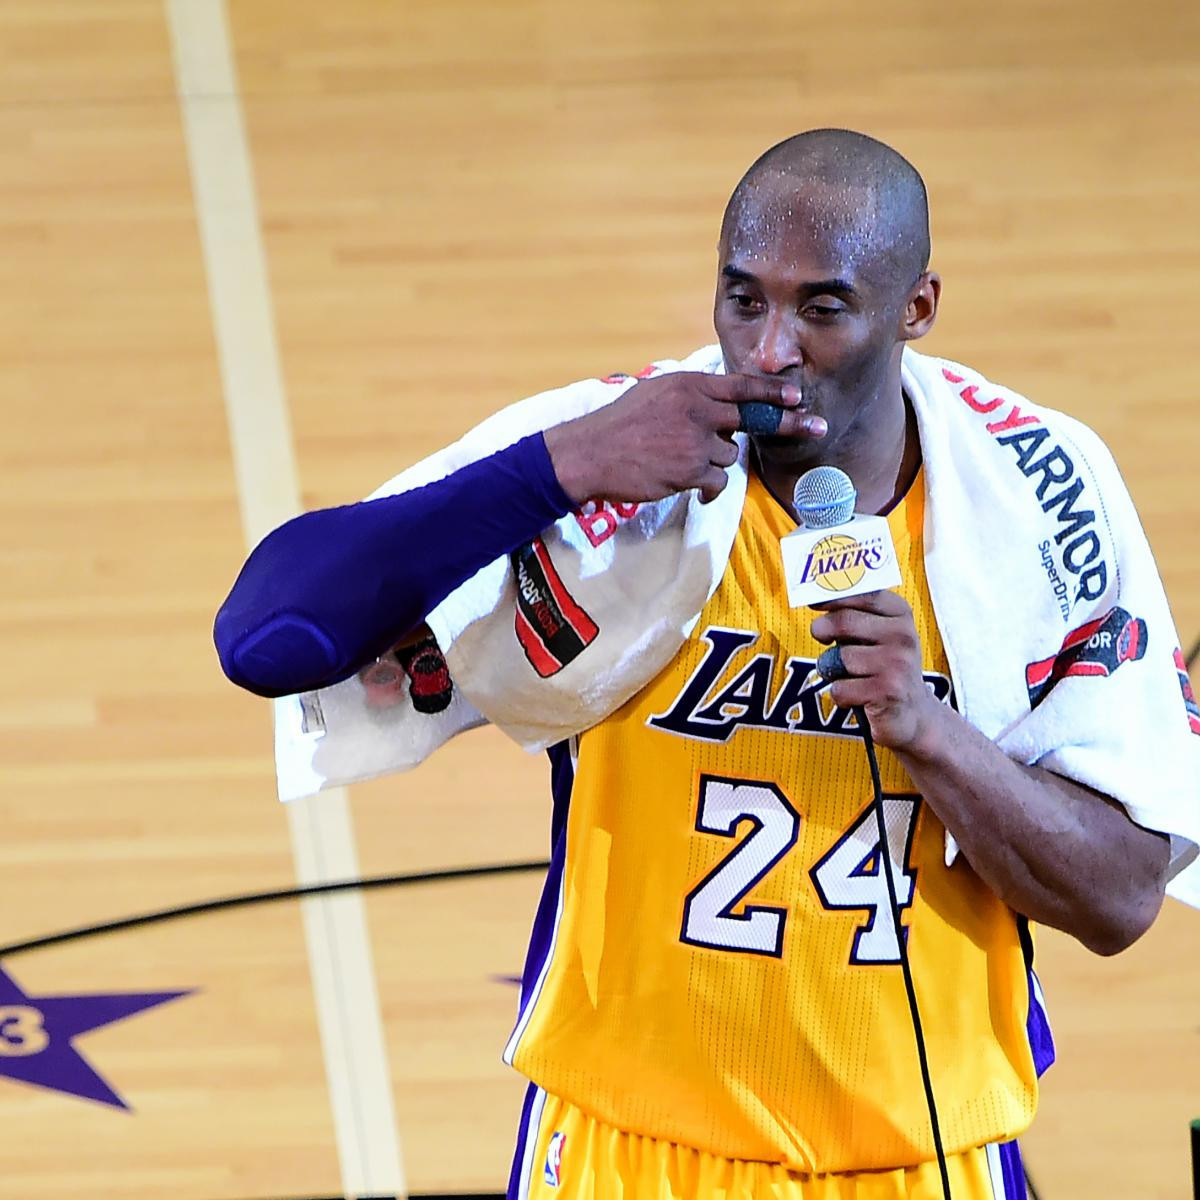 Tributes paid to mark one-year anniversary of death of Kobe Bryant